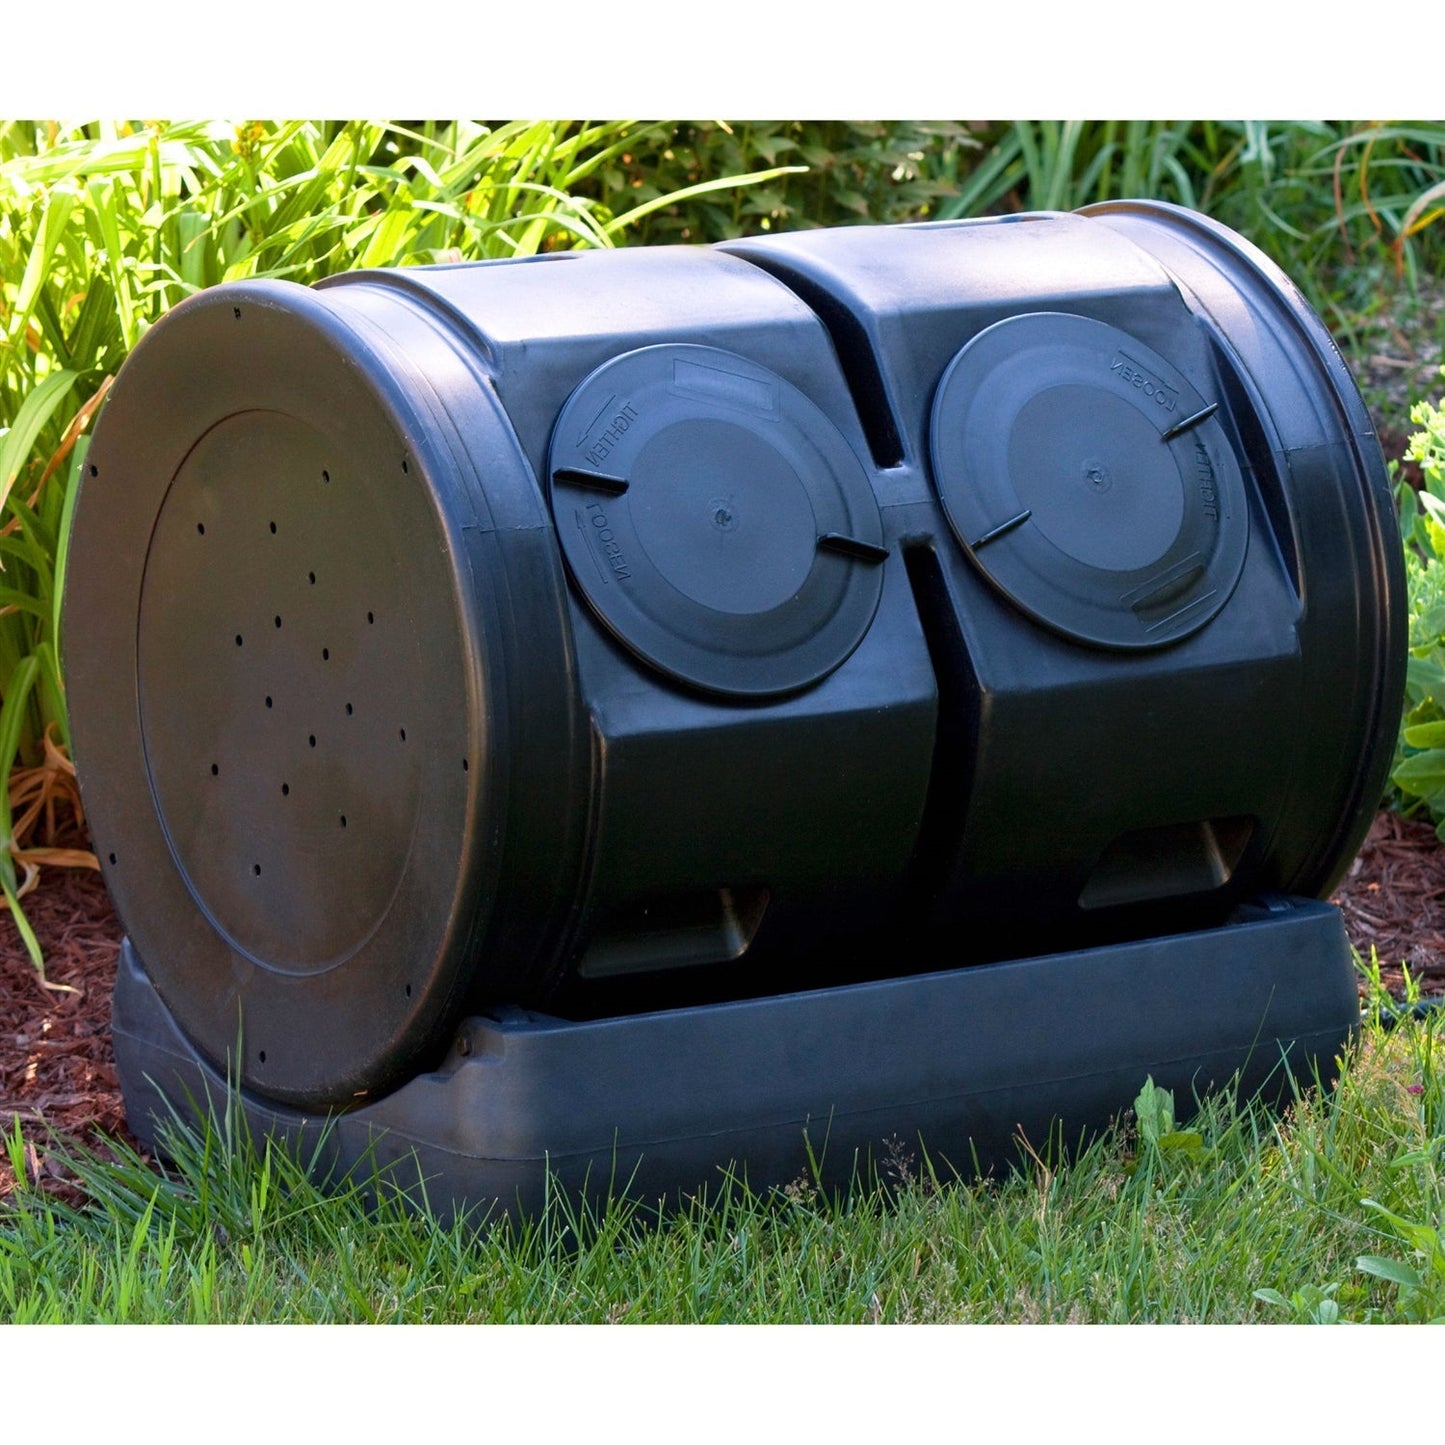 Outdoor > Gardening > Compost Bins - Duel Lid 7-Cubic Ft. Composting Bin Tumbler With Compost Tea Collector